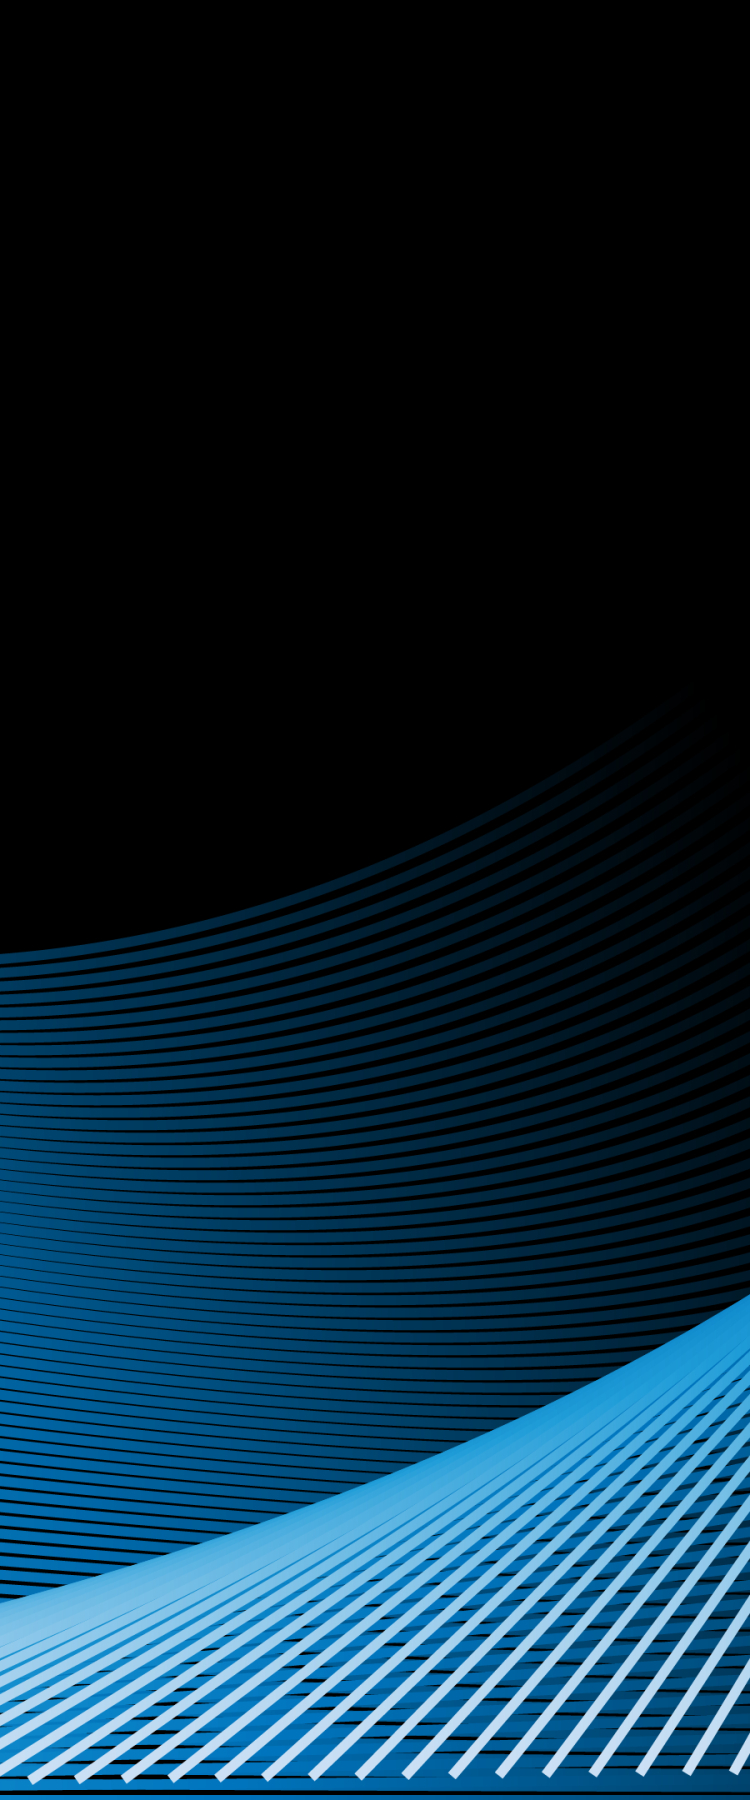 750x1800 Blue Curvey Lines 750x1800 Resolution Wallpaper, HD Abstract ...